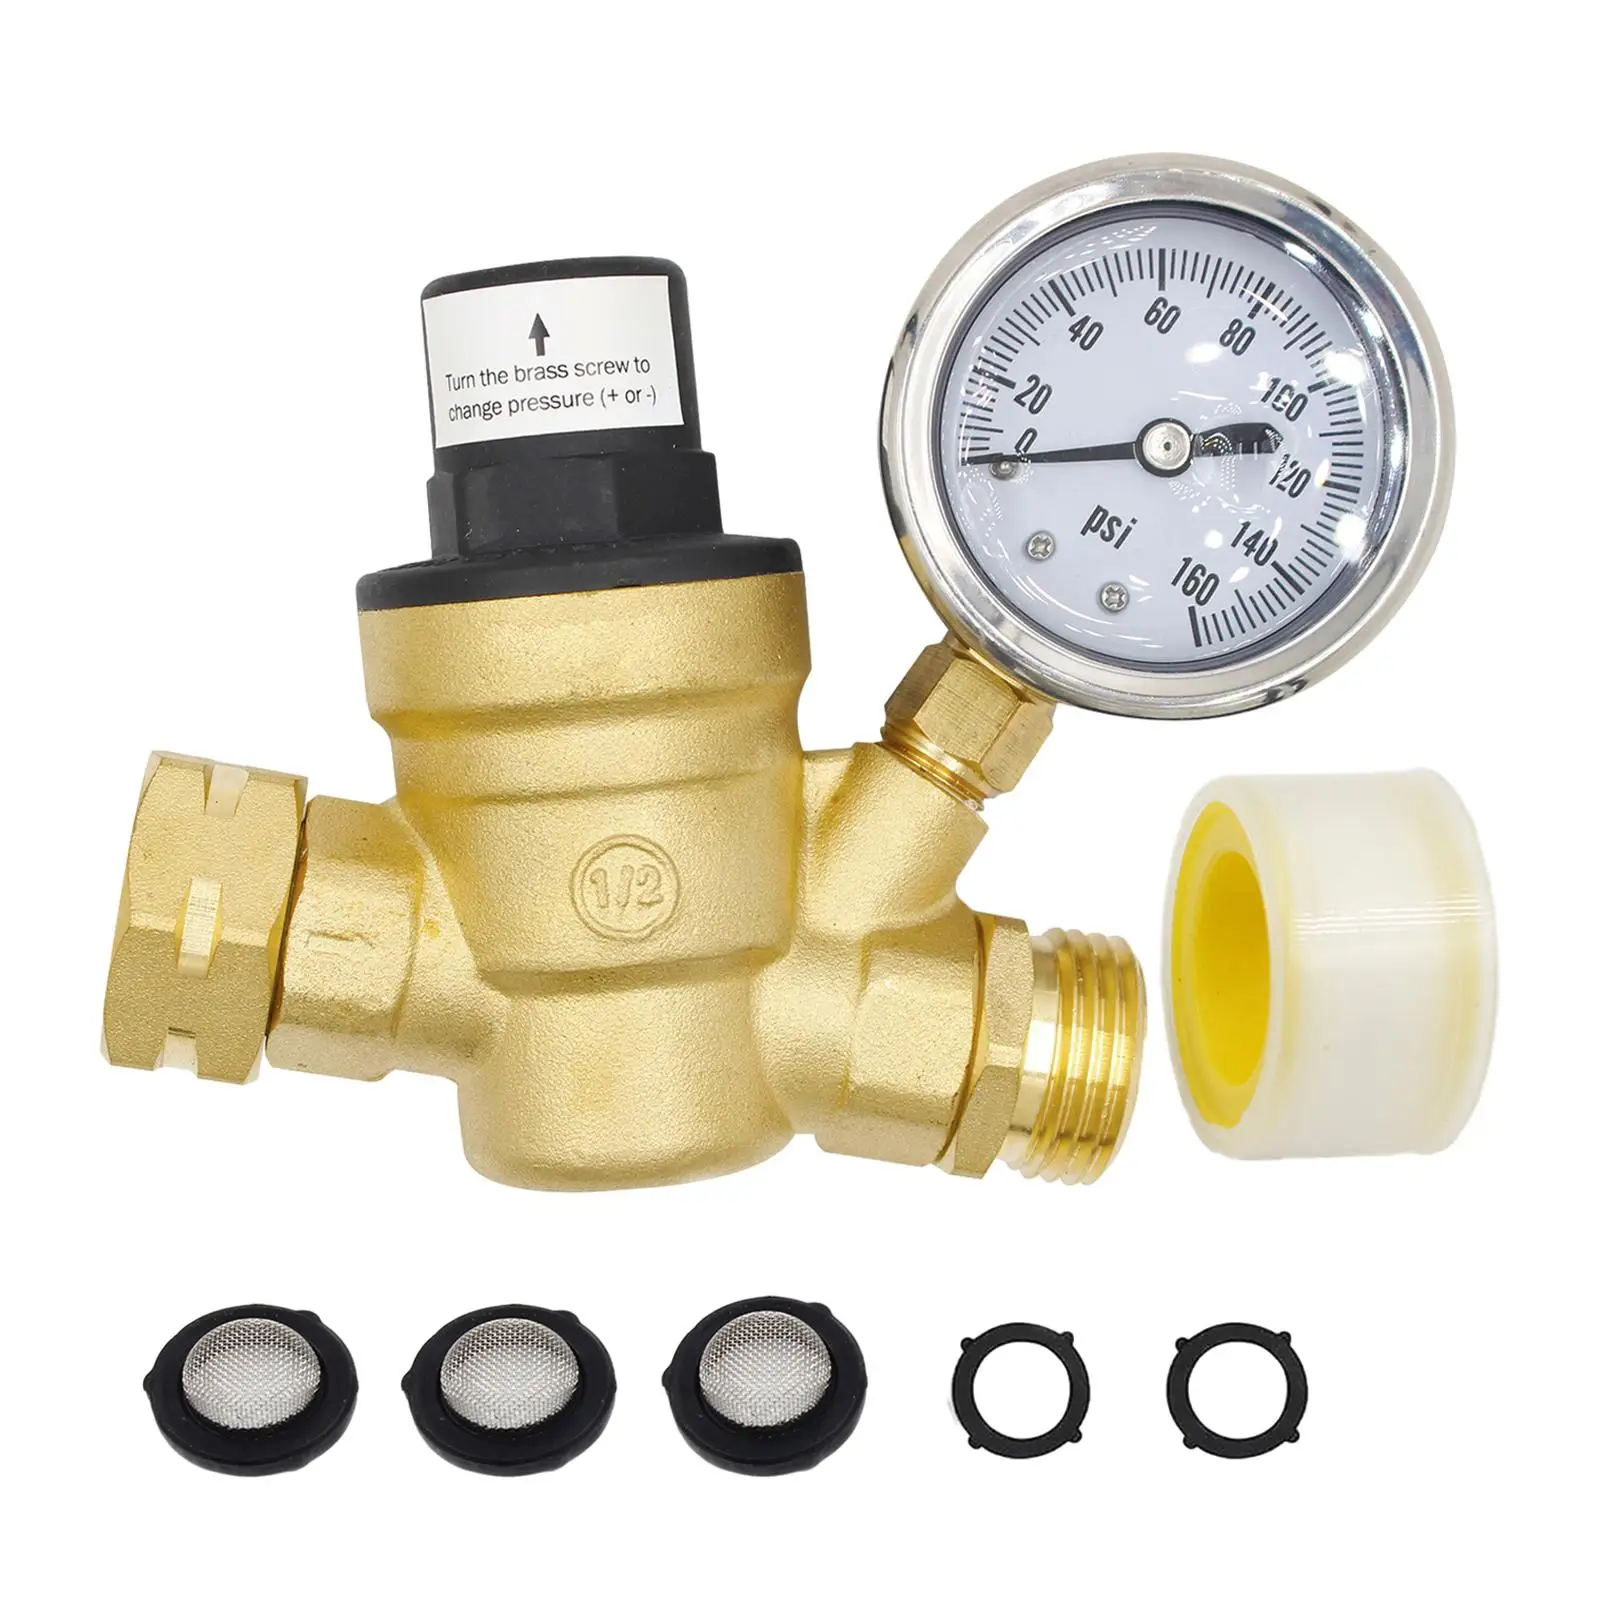 Water Pressure Valve Greenhouse with 3 Inlet Screen Filters RV Agricultural Irrigation Controller Water Pressure Regulator Valve